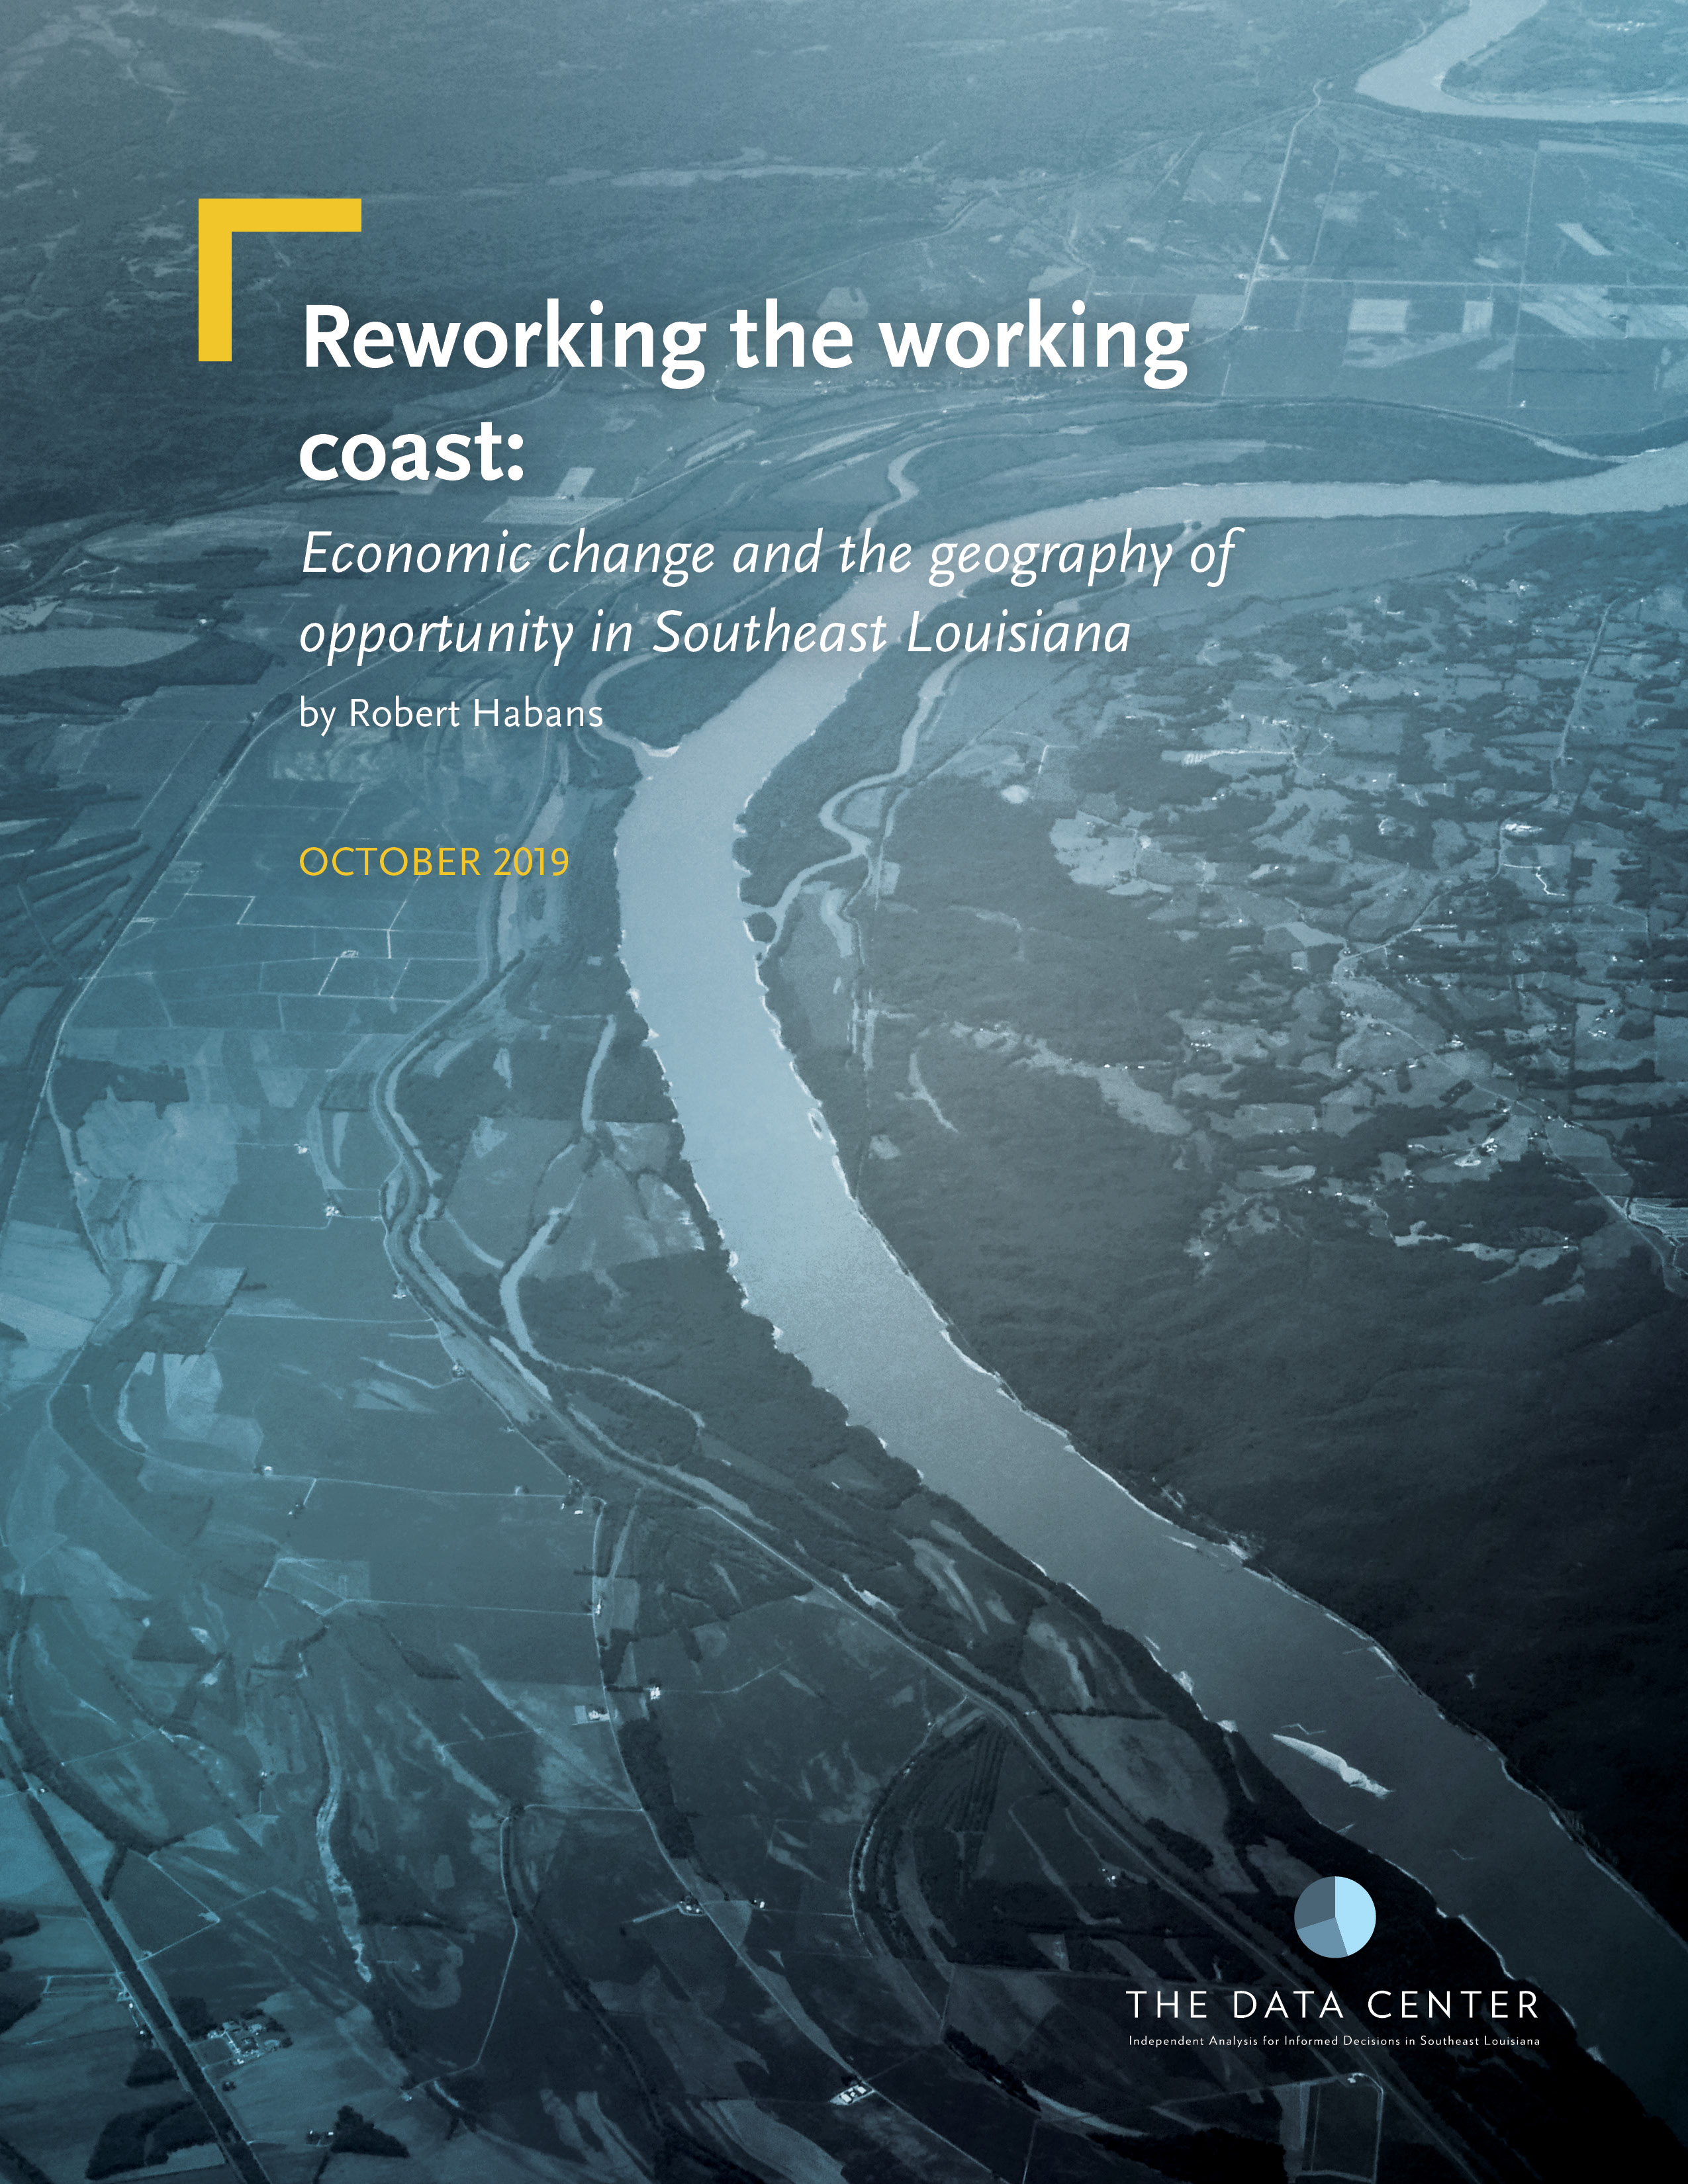 Reworking the working coast: Economic change and the geography of opportunity in Southeast Louisiana